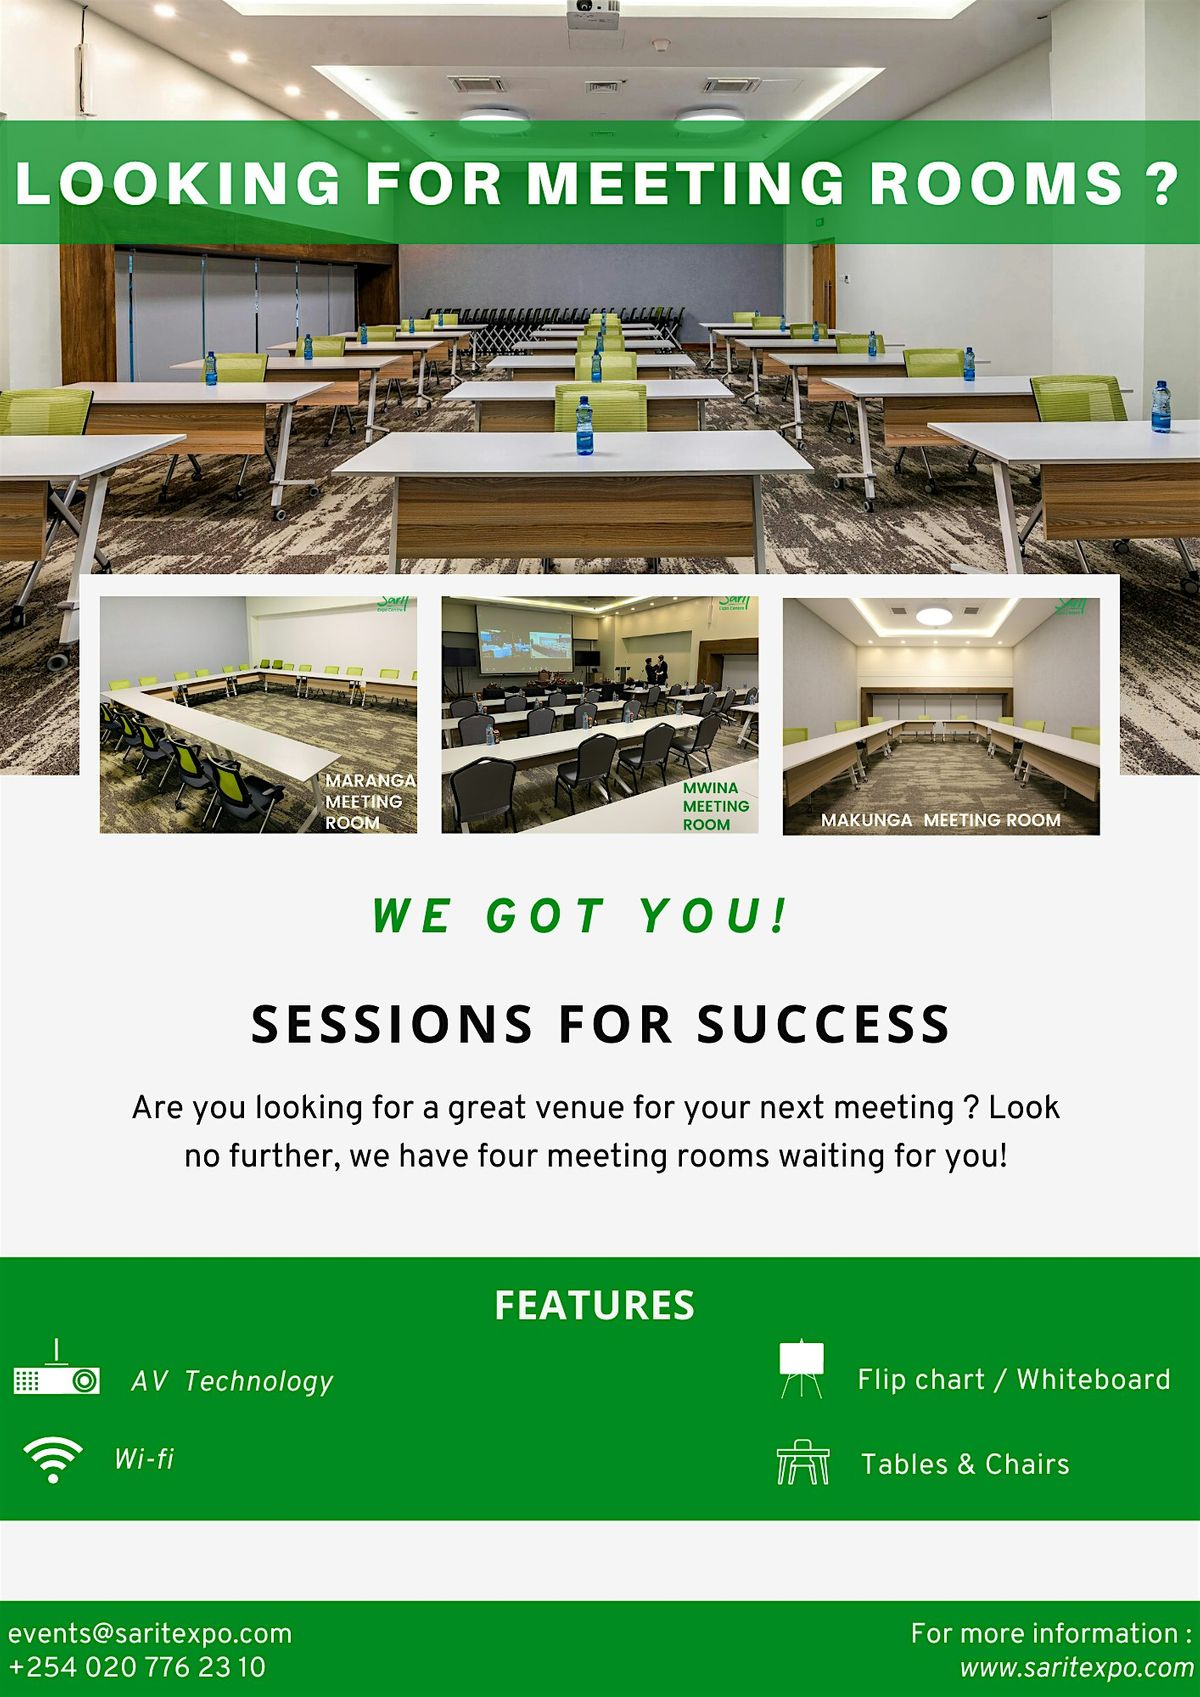 LOOKING FOR MEETING ROOMS? EMAIL US TODAY - meetingrooms@saritexpo.com